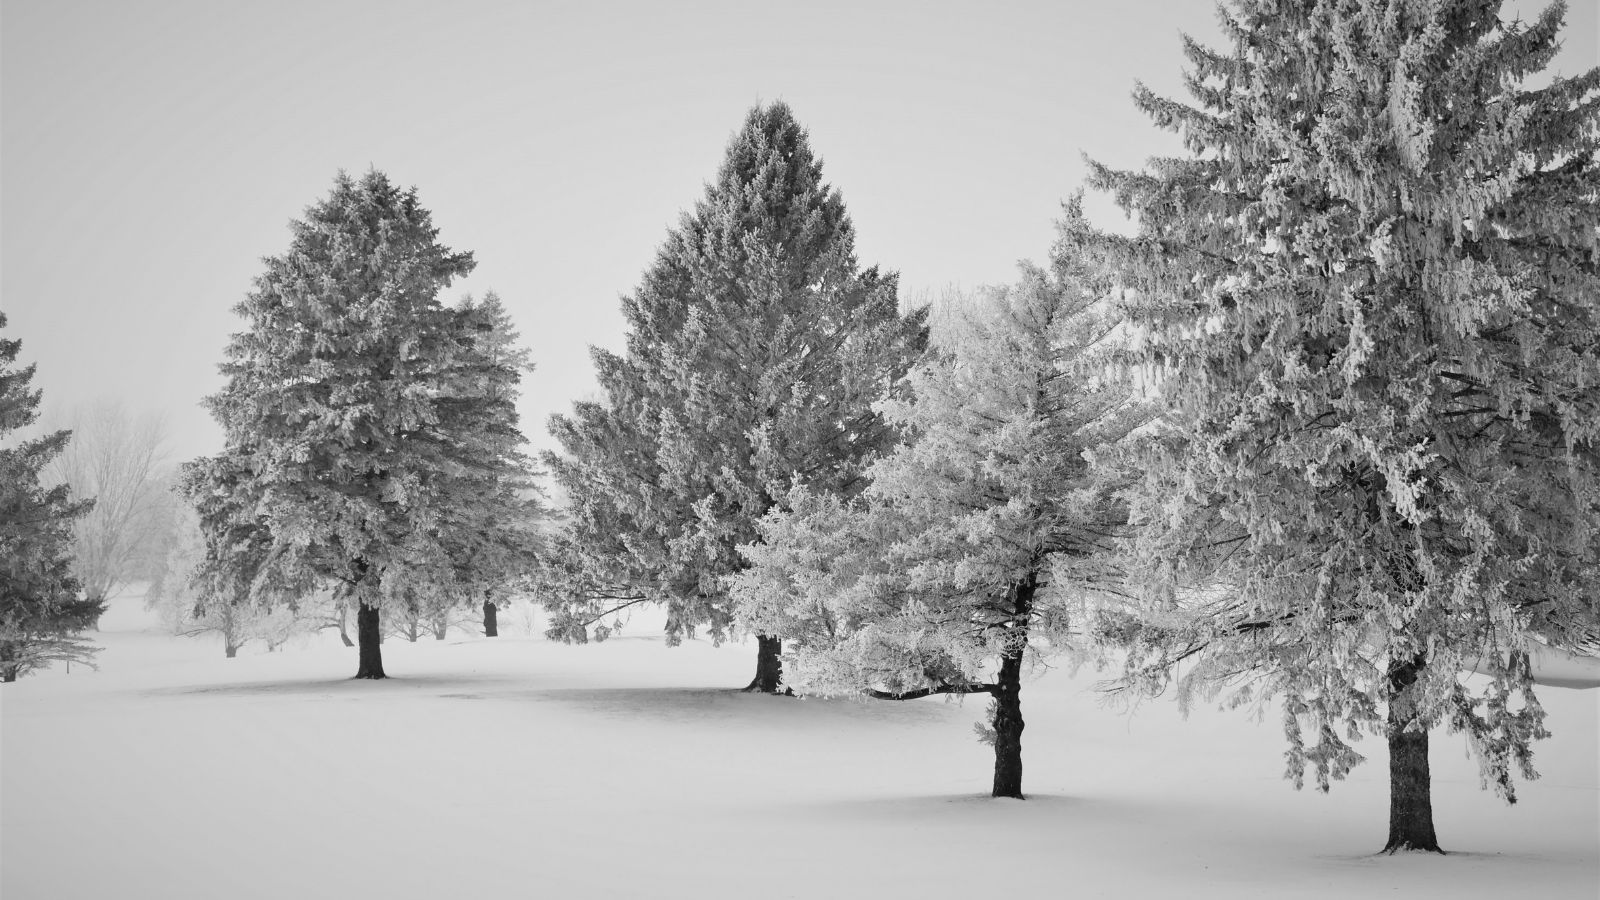 Wisconsin, 1-3-2021, Driftless area Golf Course, Peaceful, snow covered trees, Vernon County, no people, fresh snow, no tracks, crisp white fresh fallen snow, tourist destination, attraction